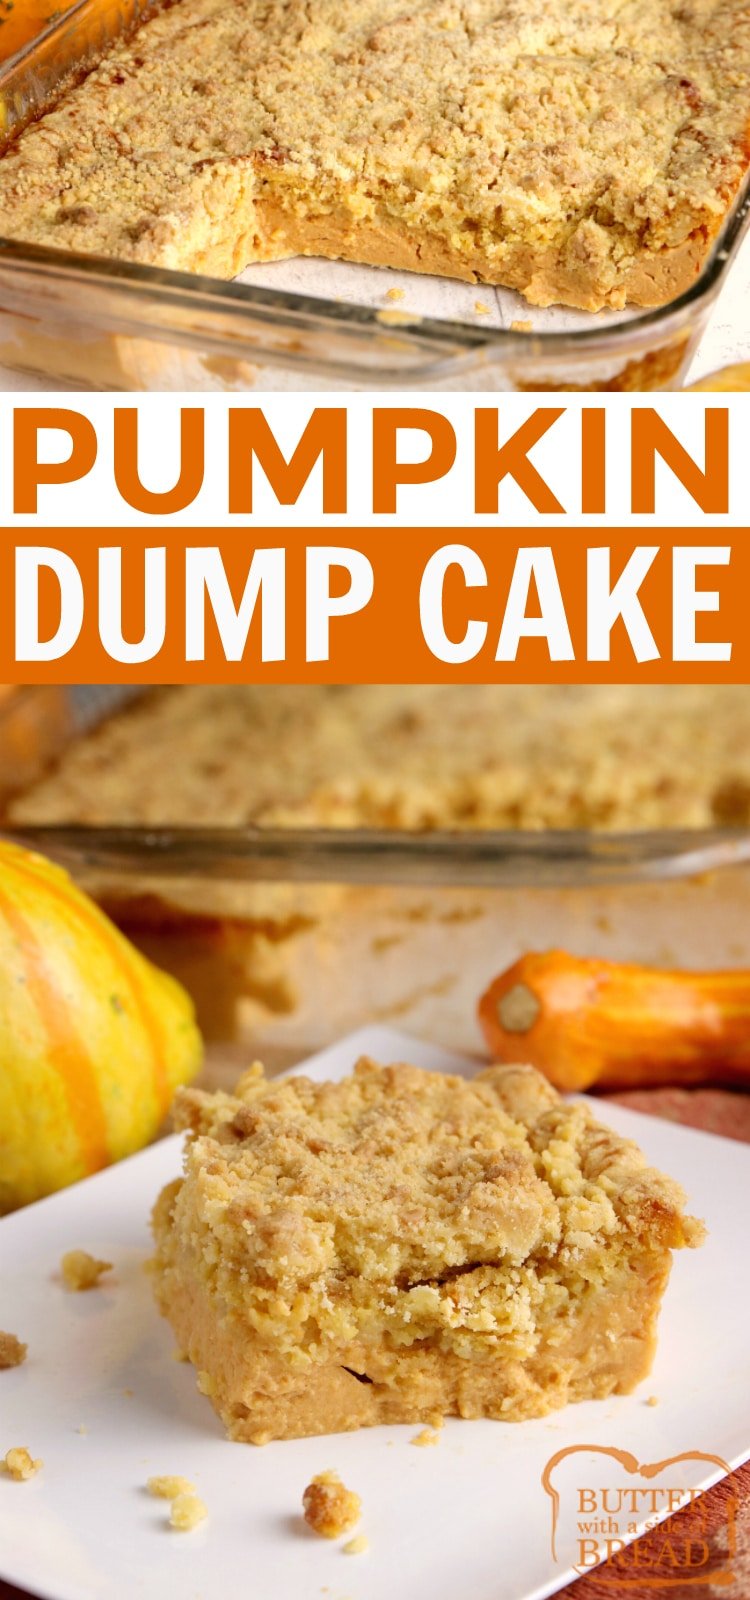 This pumpkin dump cake is so easy to make and is made with only 5 ingredients! This pumpkin cake recipe tastes like pumpkin pie and makes enough to feed a crowd. Delicious warm or cold - the perfect fall dessert!